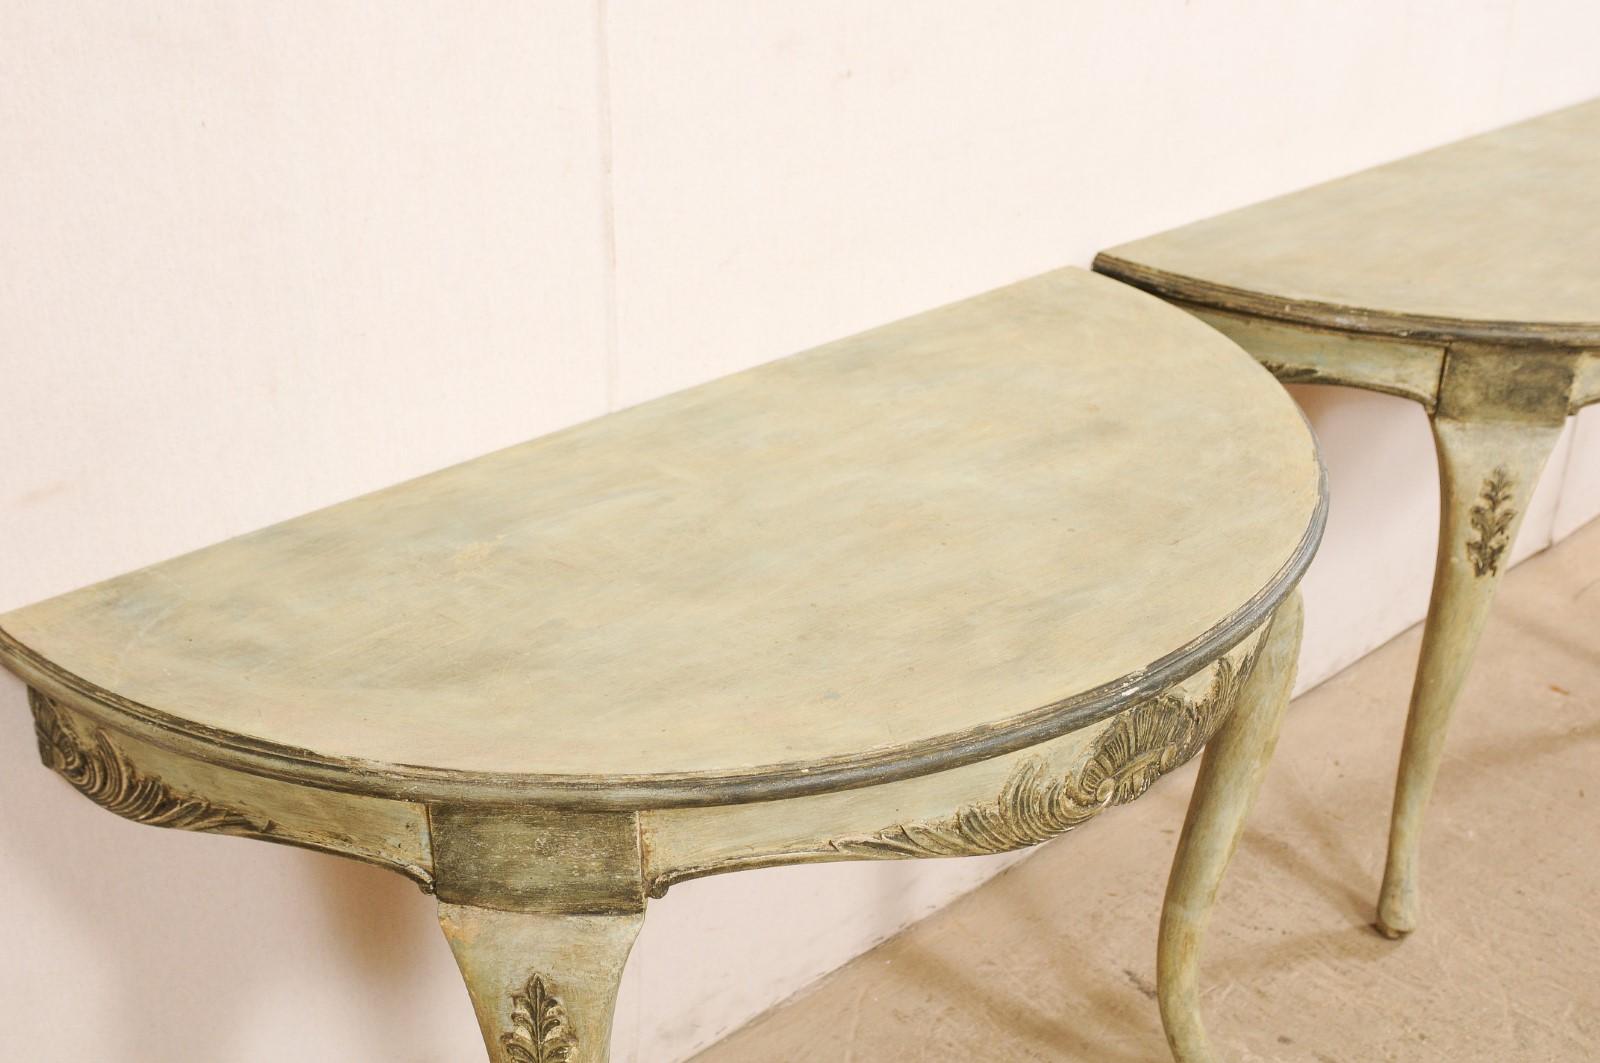 Swedish Pair of Wall-Mounted Demilune Tables with Carved Shell & Foliage Accents For Sale 3